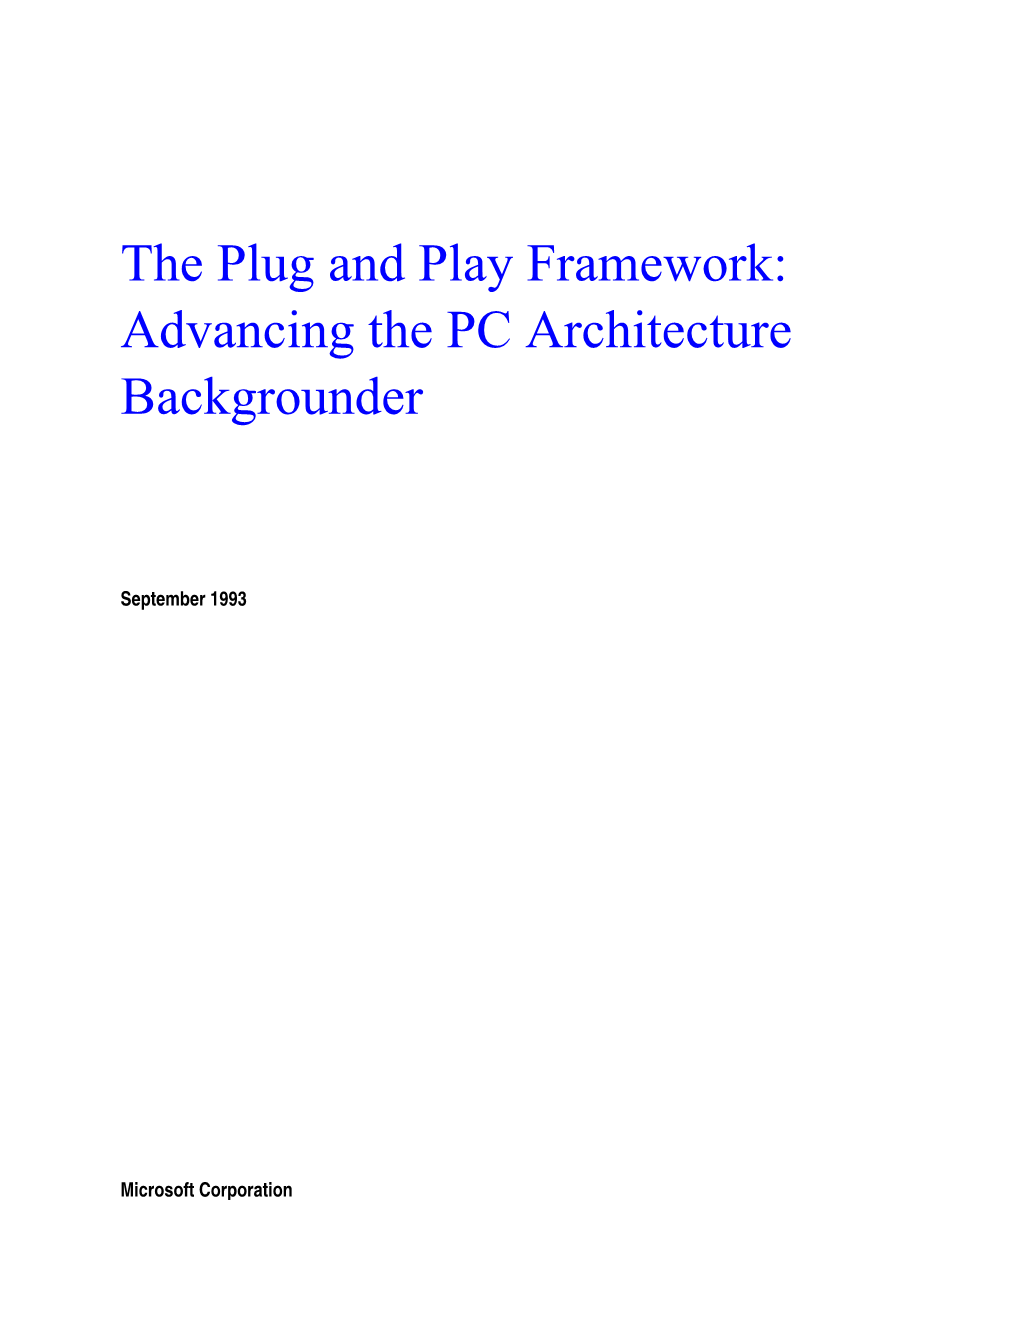 The Plug and Play Framework: Advancing the PC Architecture Backgrounder